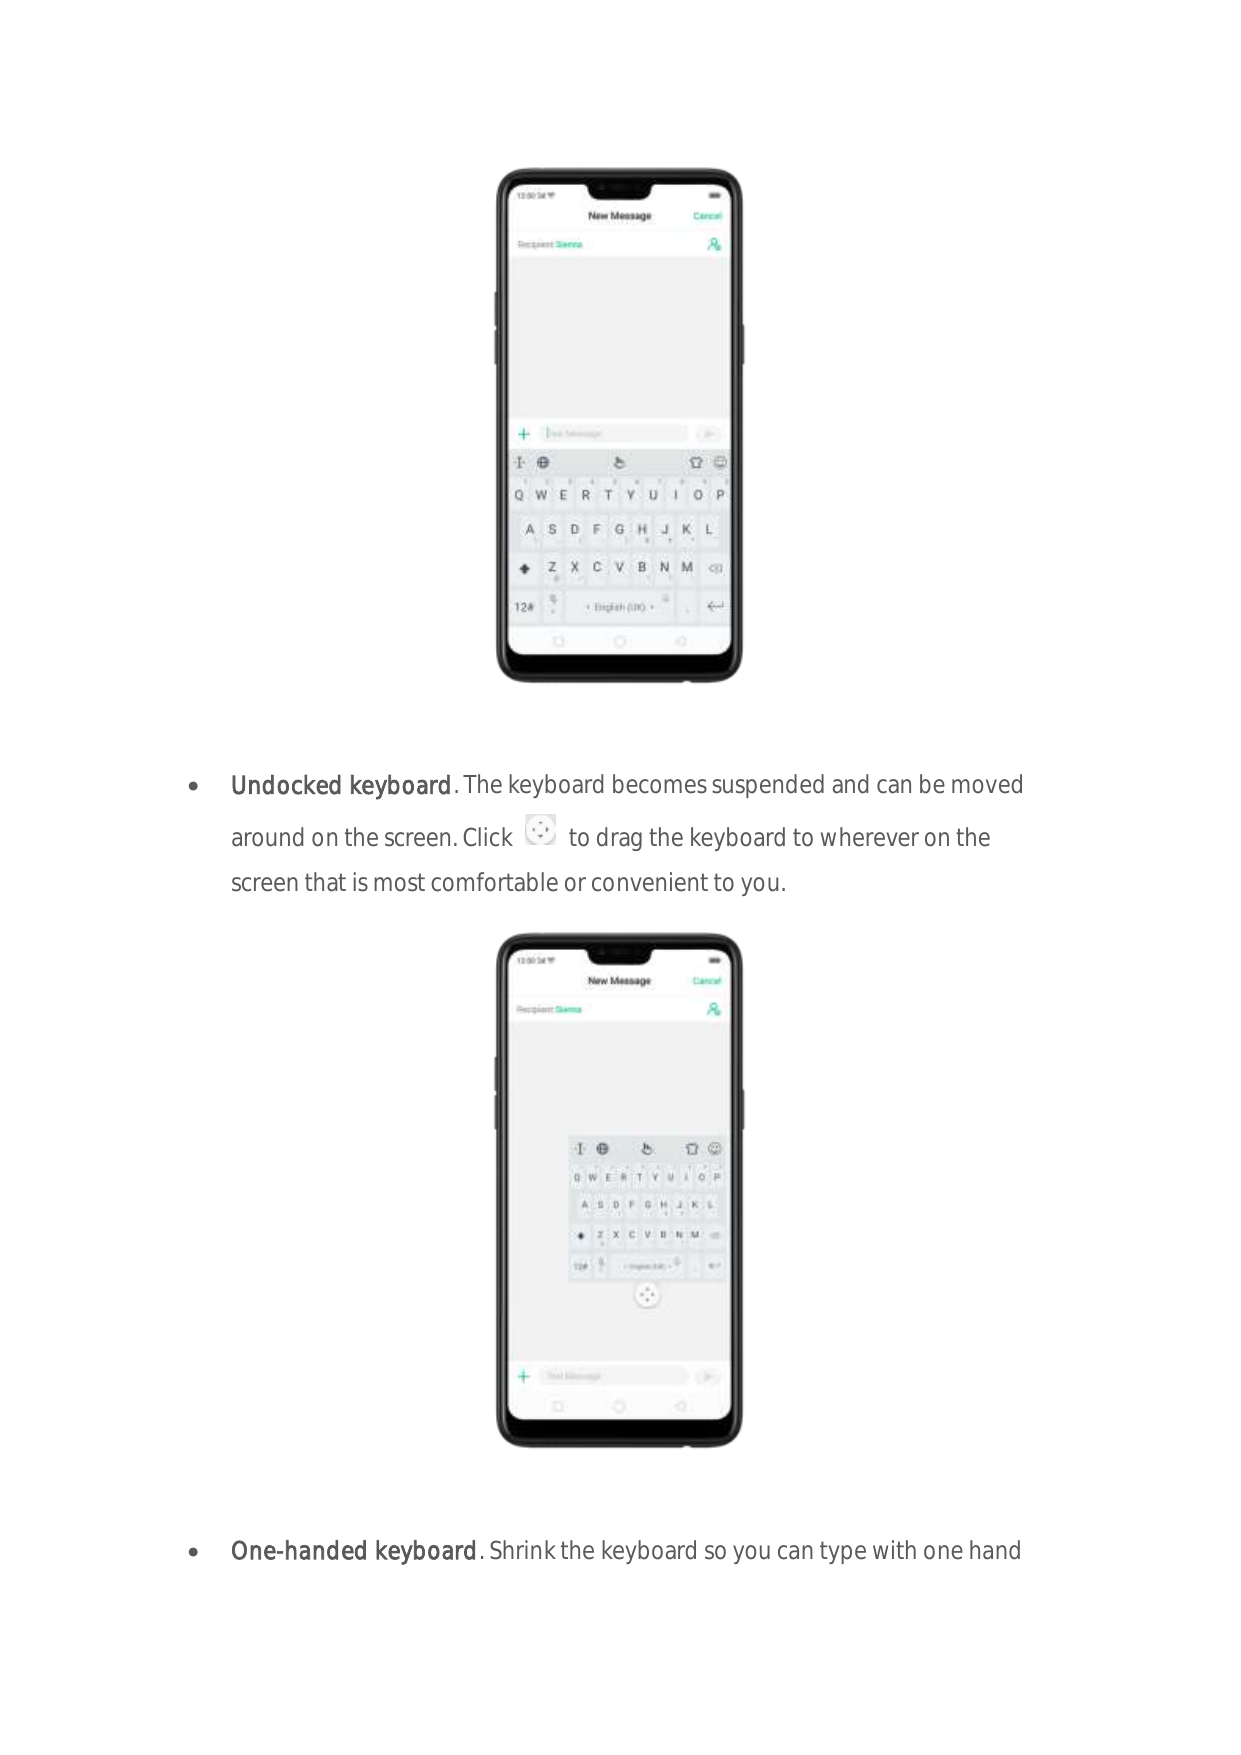 Undocked keyboard. The keyboard becomes suspended and can be movedaround on the screen. Clickto drag the keyboard to wherever o